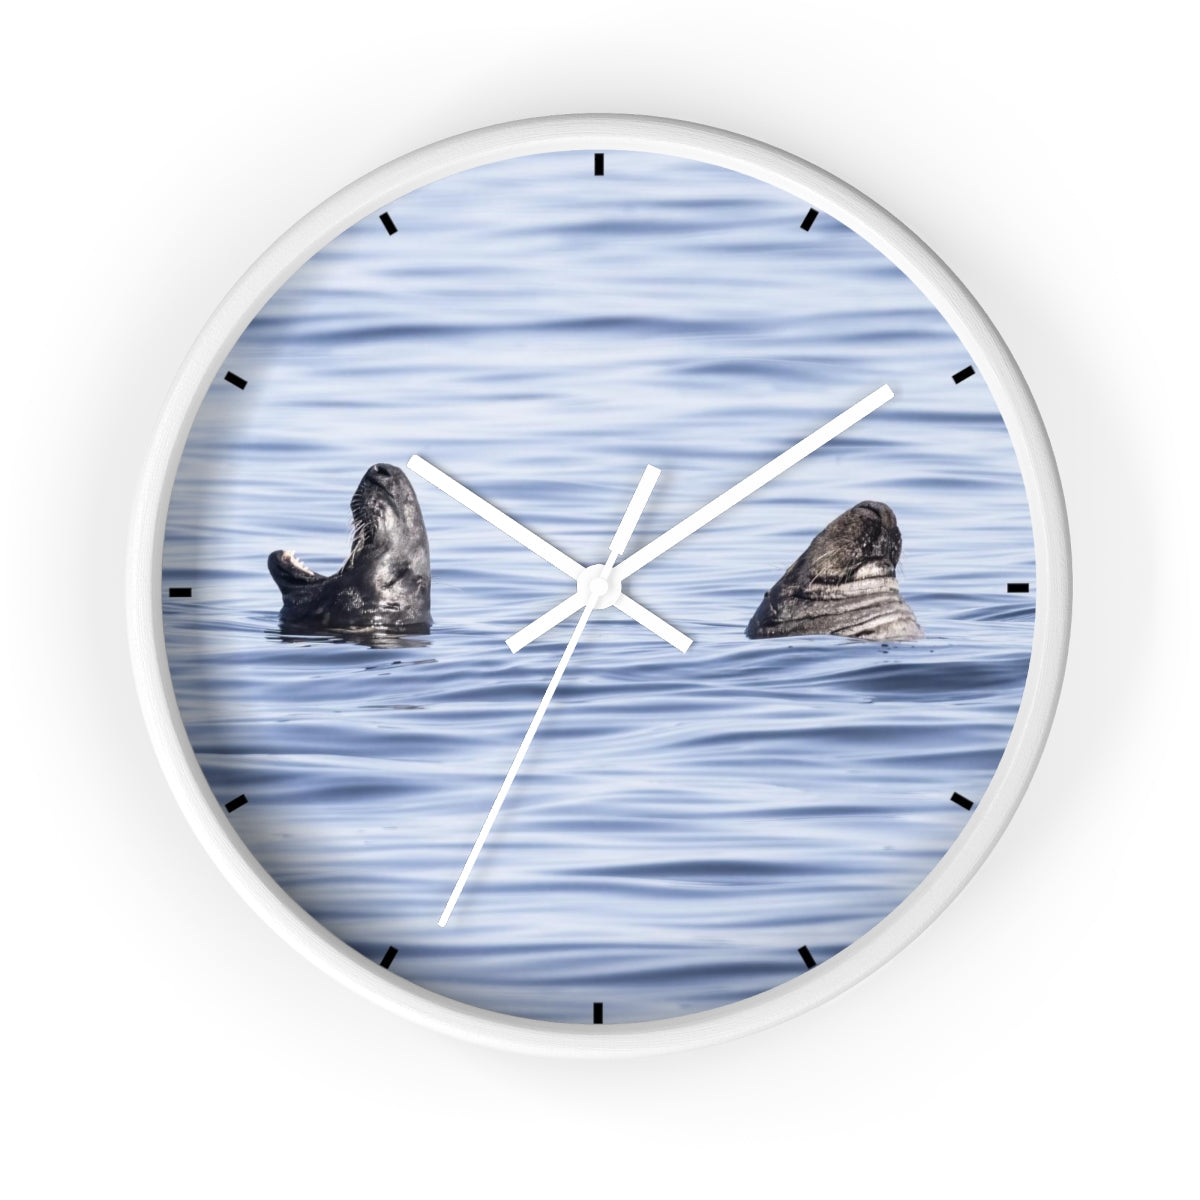 Happily Married Seal Couple Wall clock